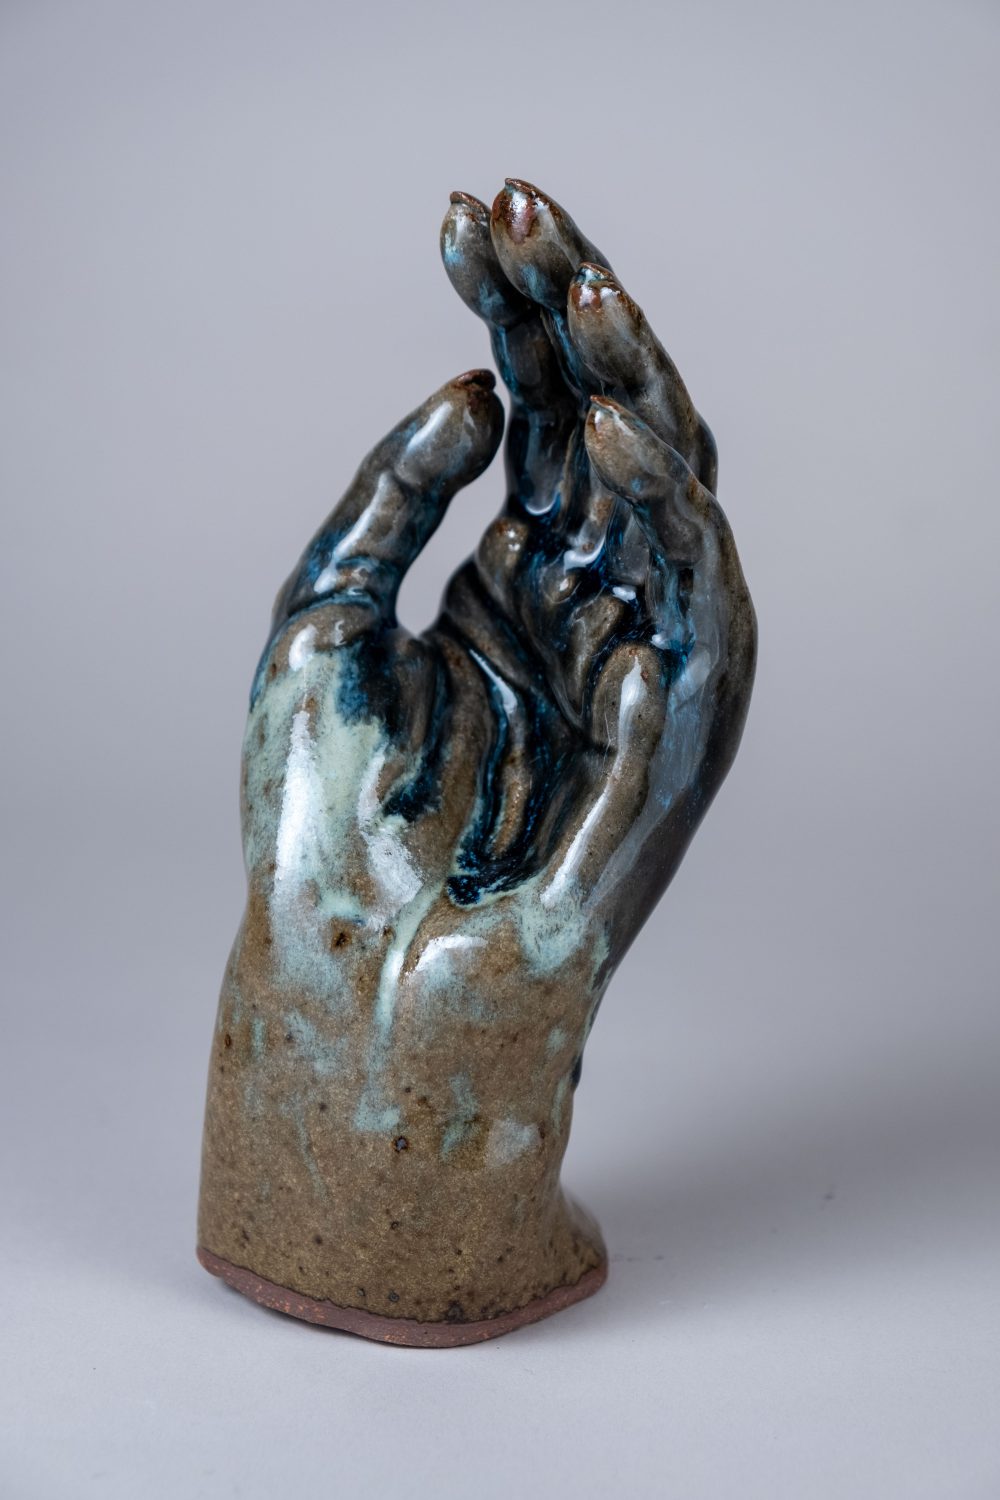 A ceramic sculpture of an upright, relaxed human hand and wrist, glazed with shades of blue and red-tinted brown.